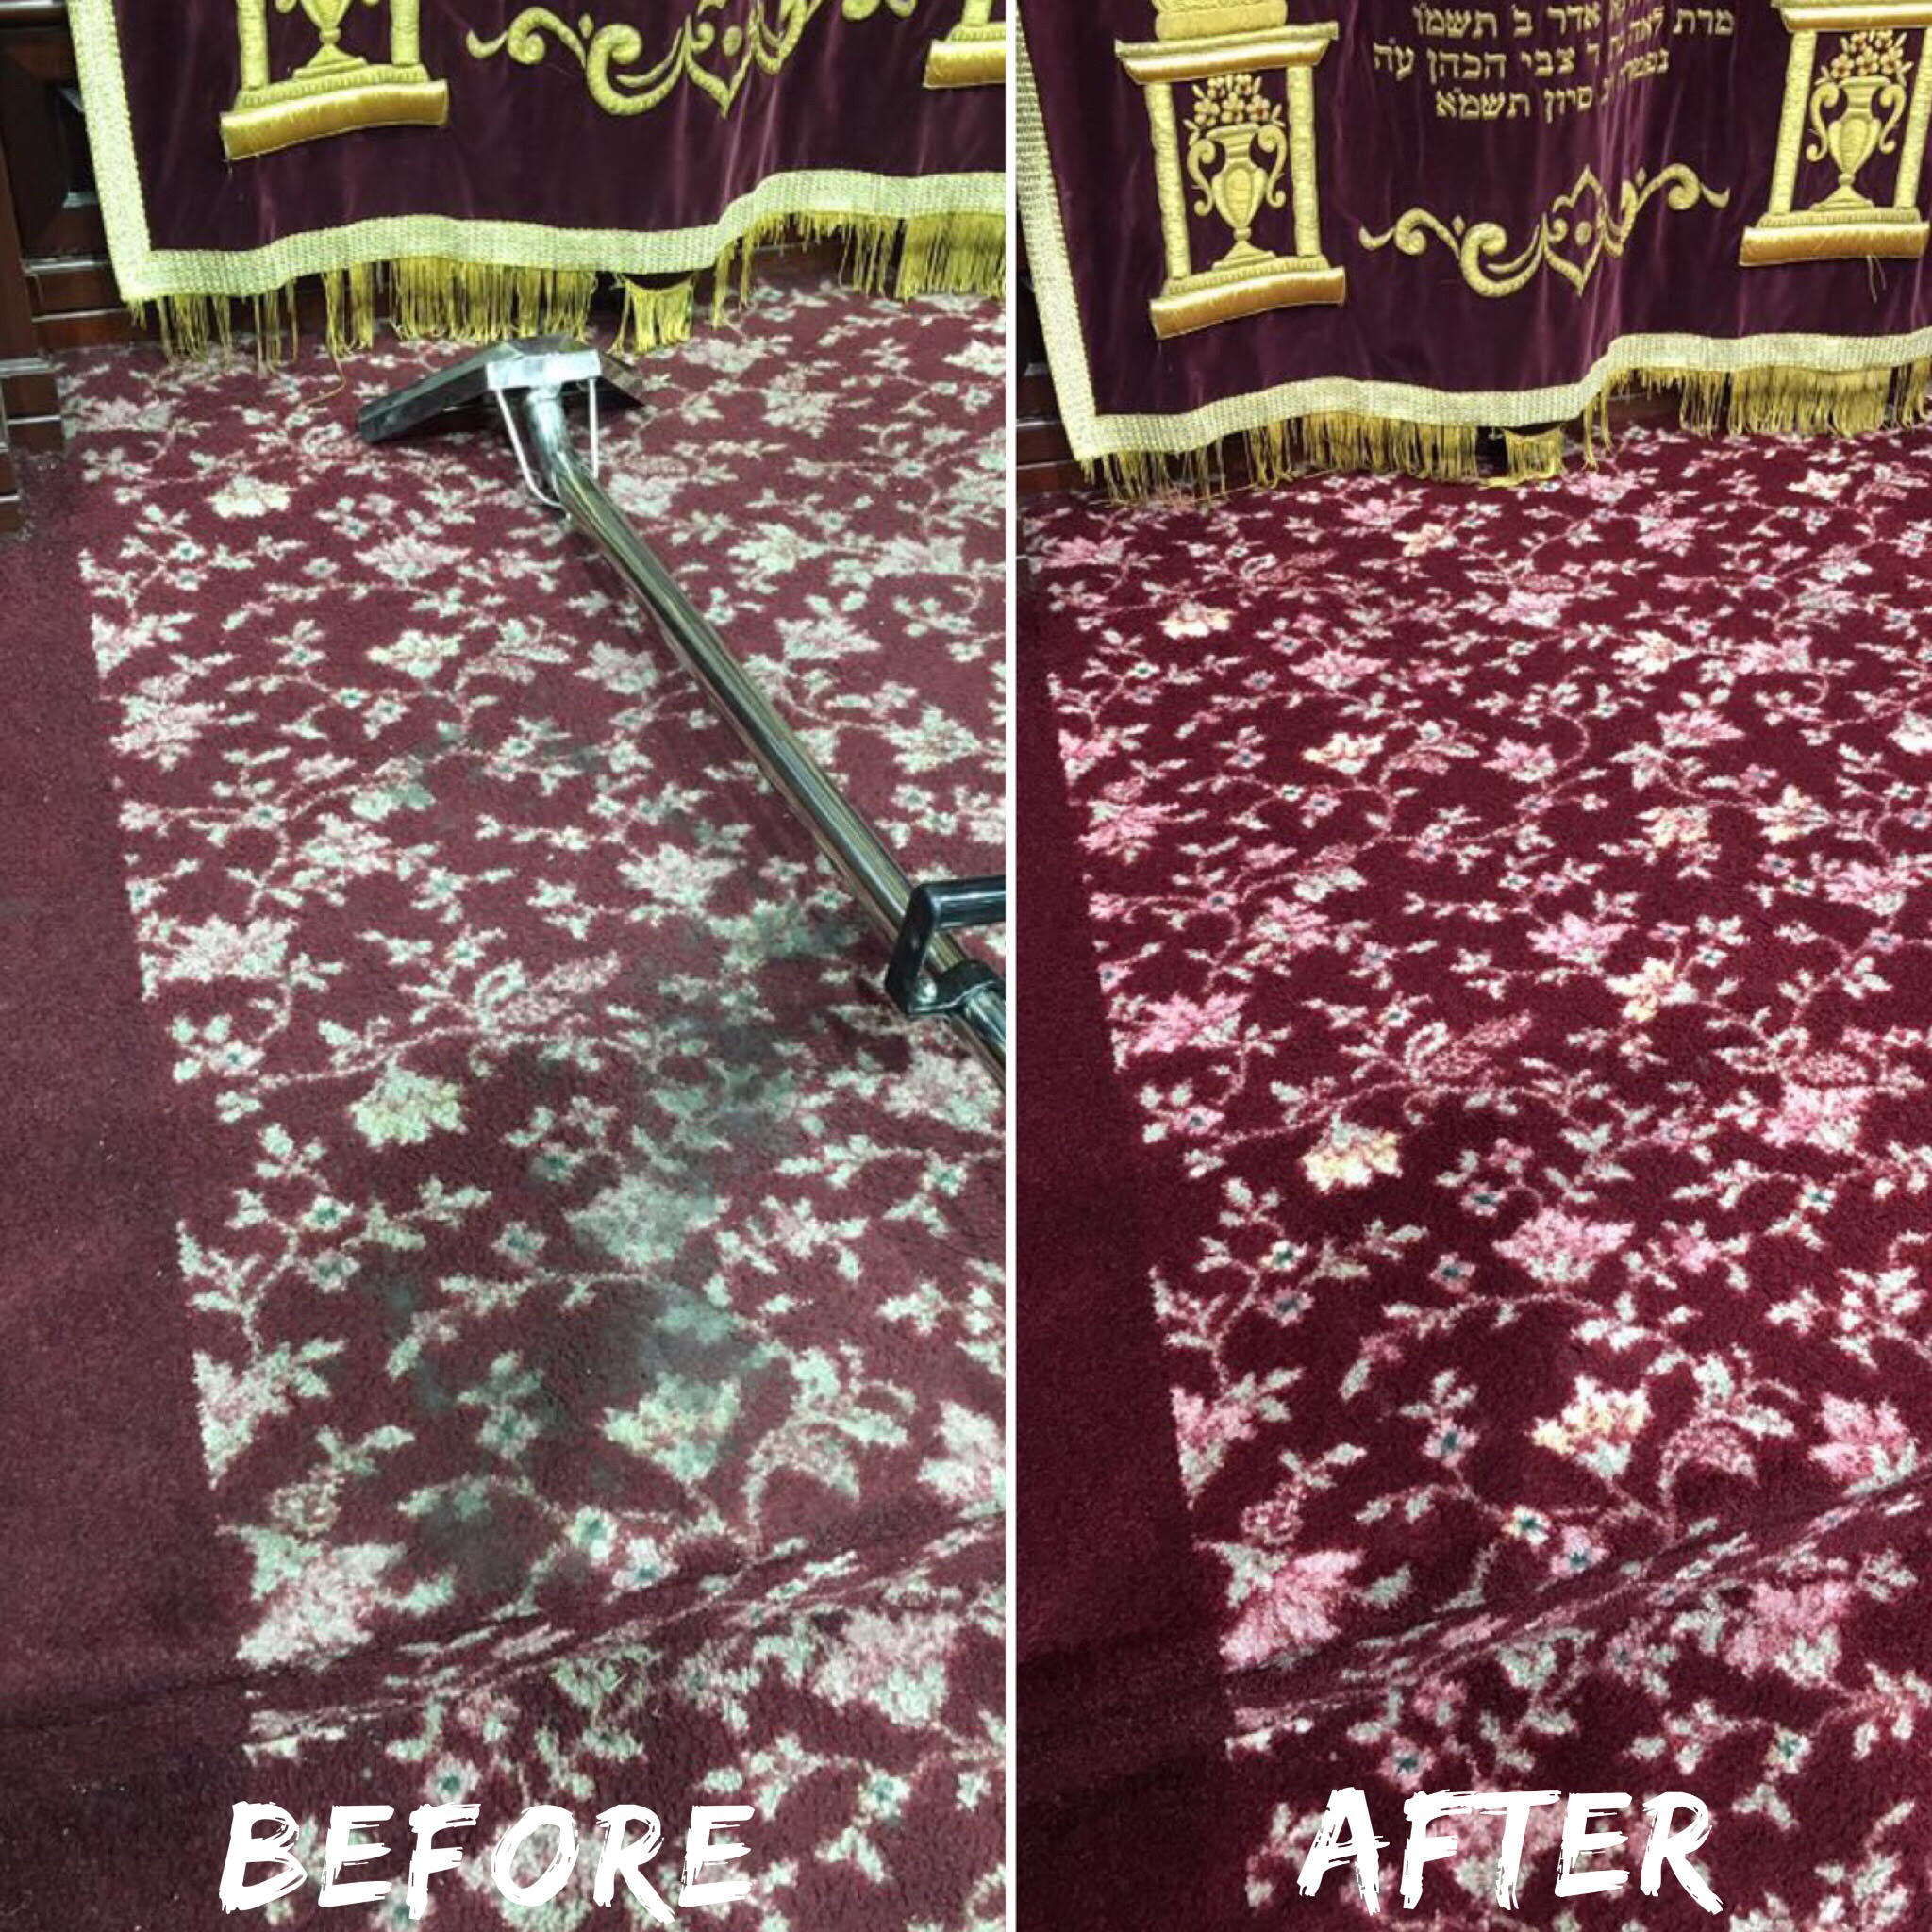 Carpet Cleaning, Stain Removal, Disinfection and Sanitizing